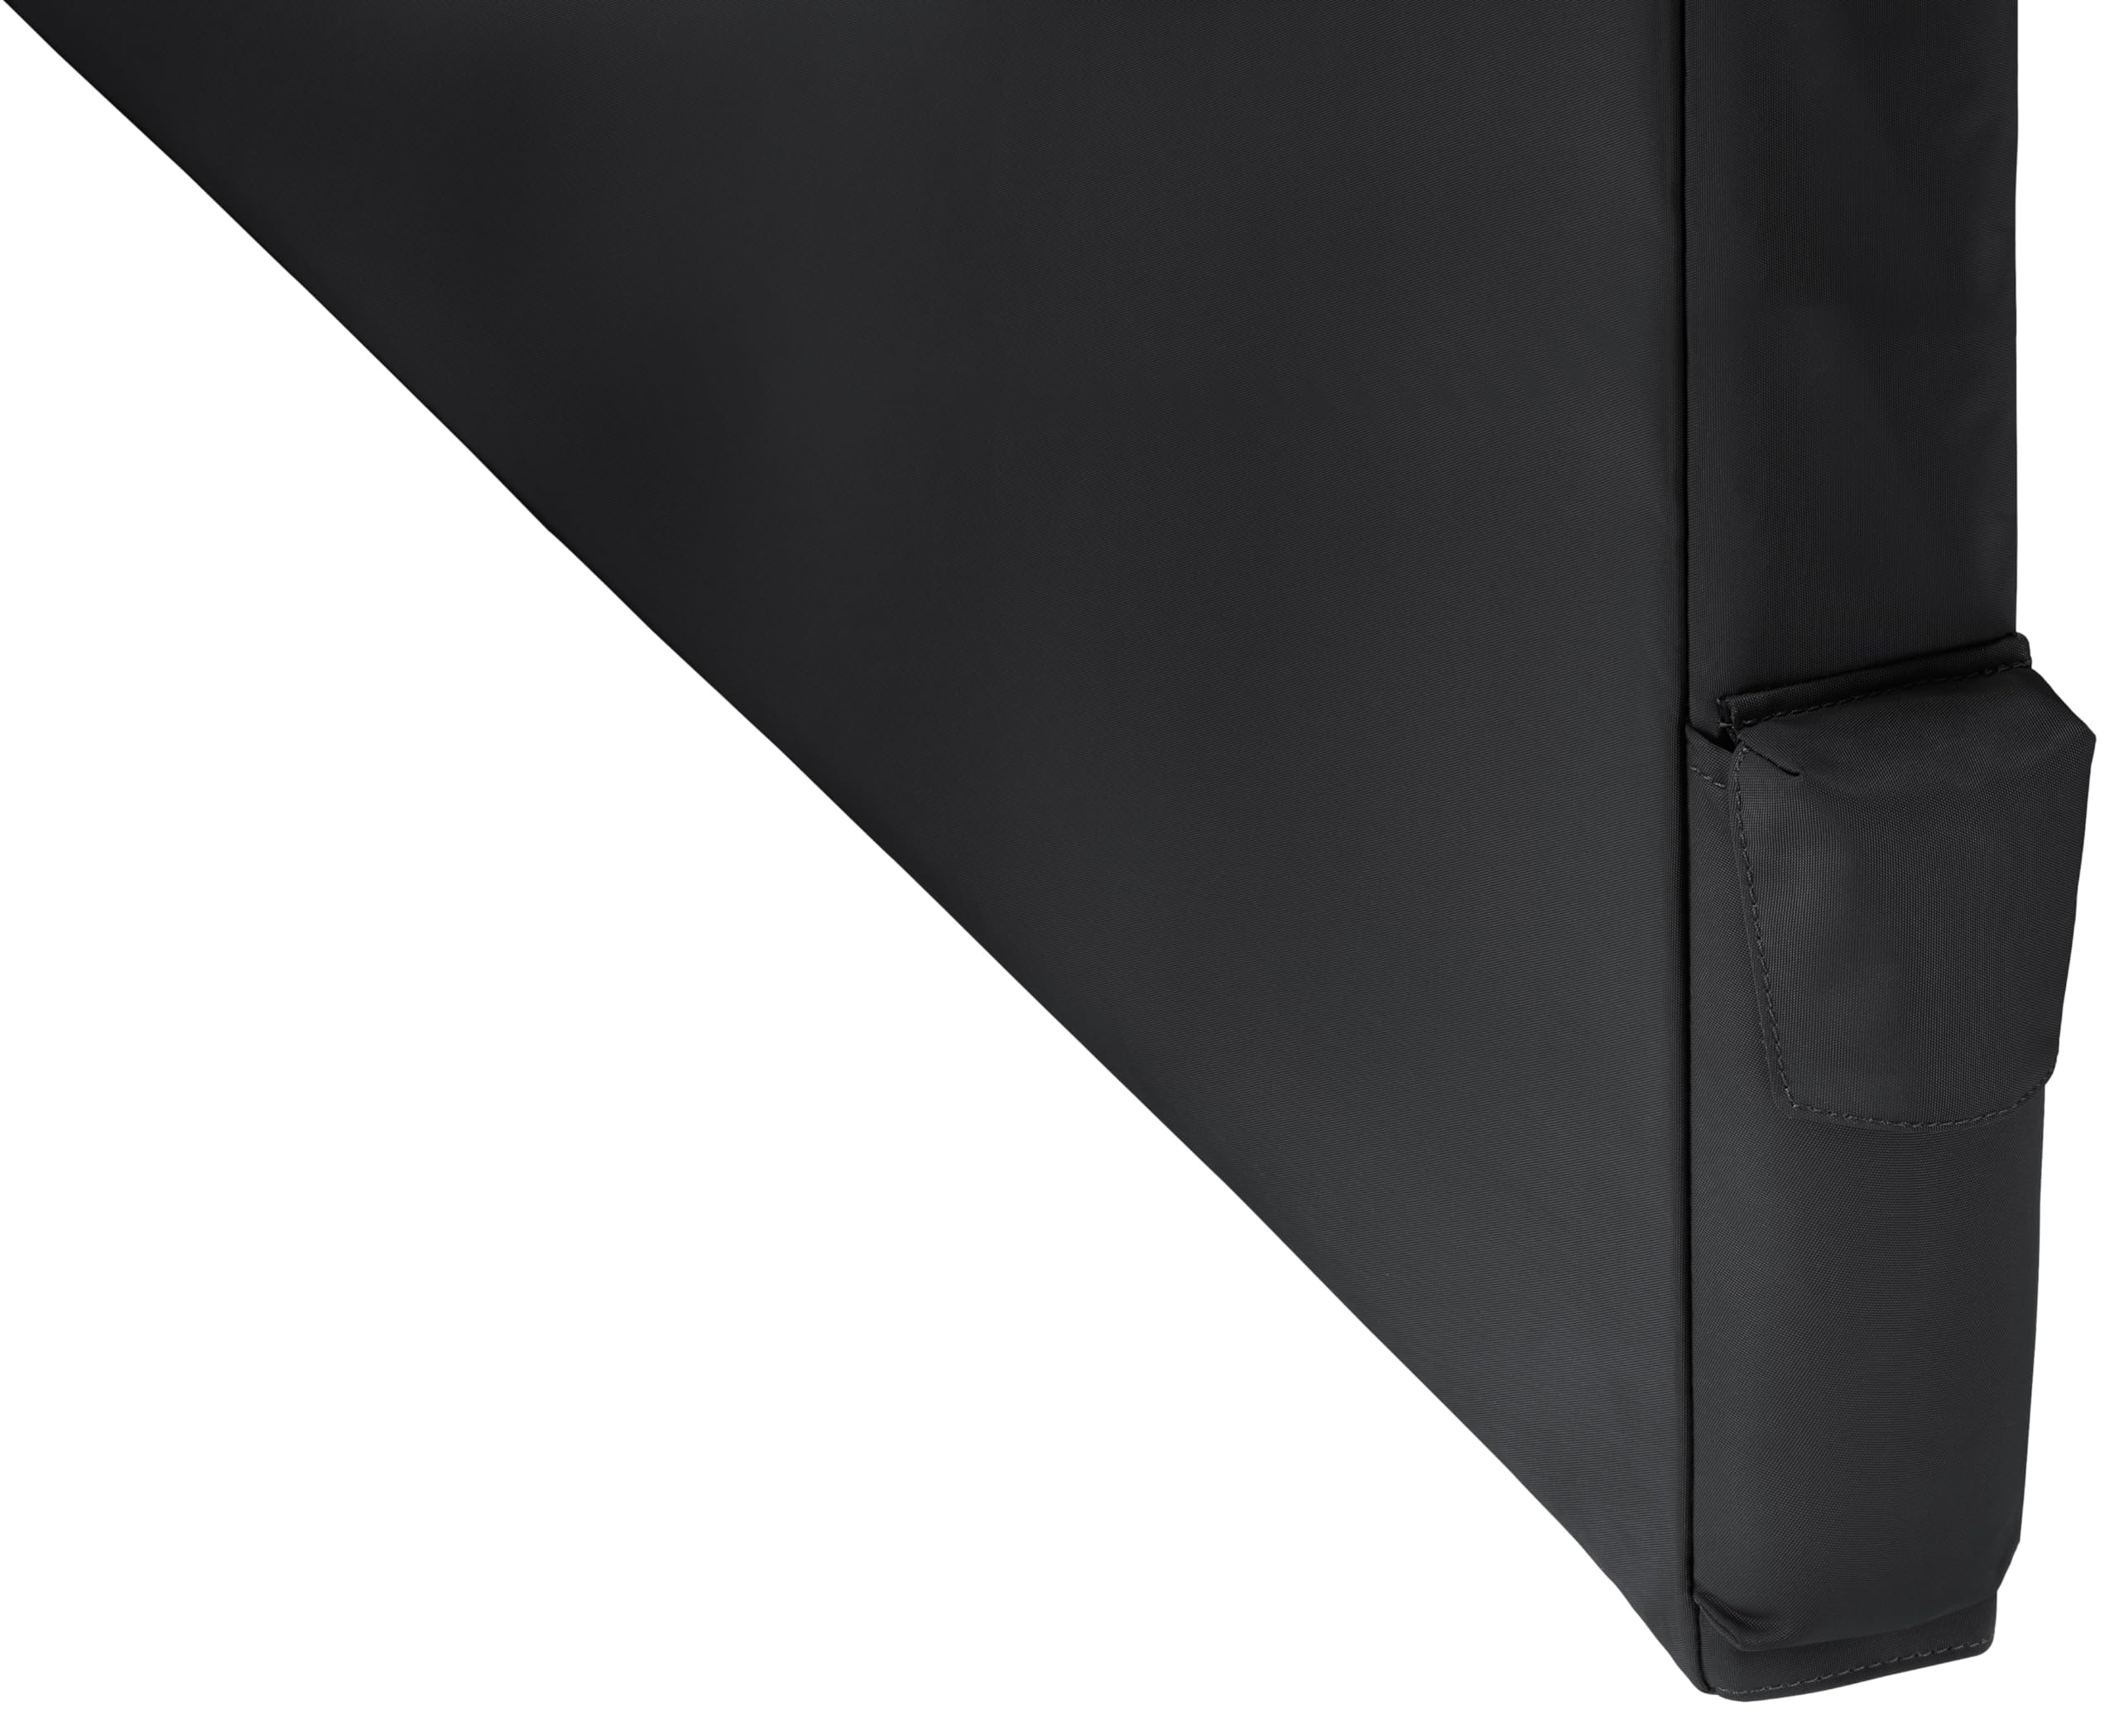 SAMSUNG 75-Inch The Terrace Outdoor Smart TV Dust Cover with Protective Lining, Breathable Holes, Soundbar Protection, Pocket for Remote and Accessories, VG-SDCC75G